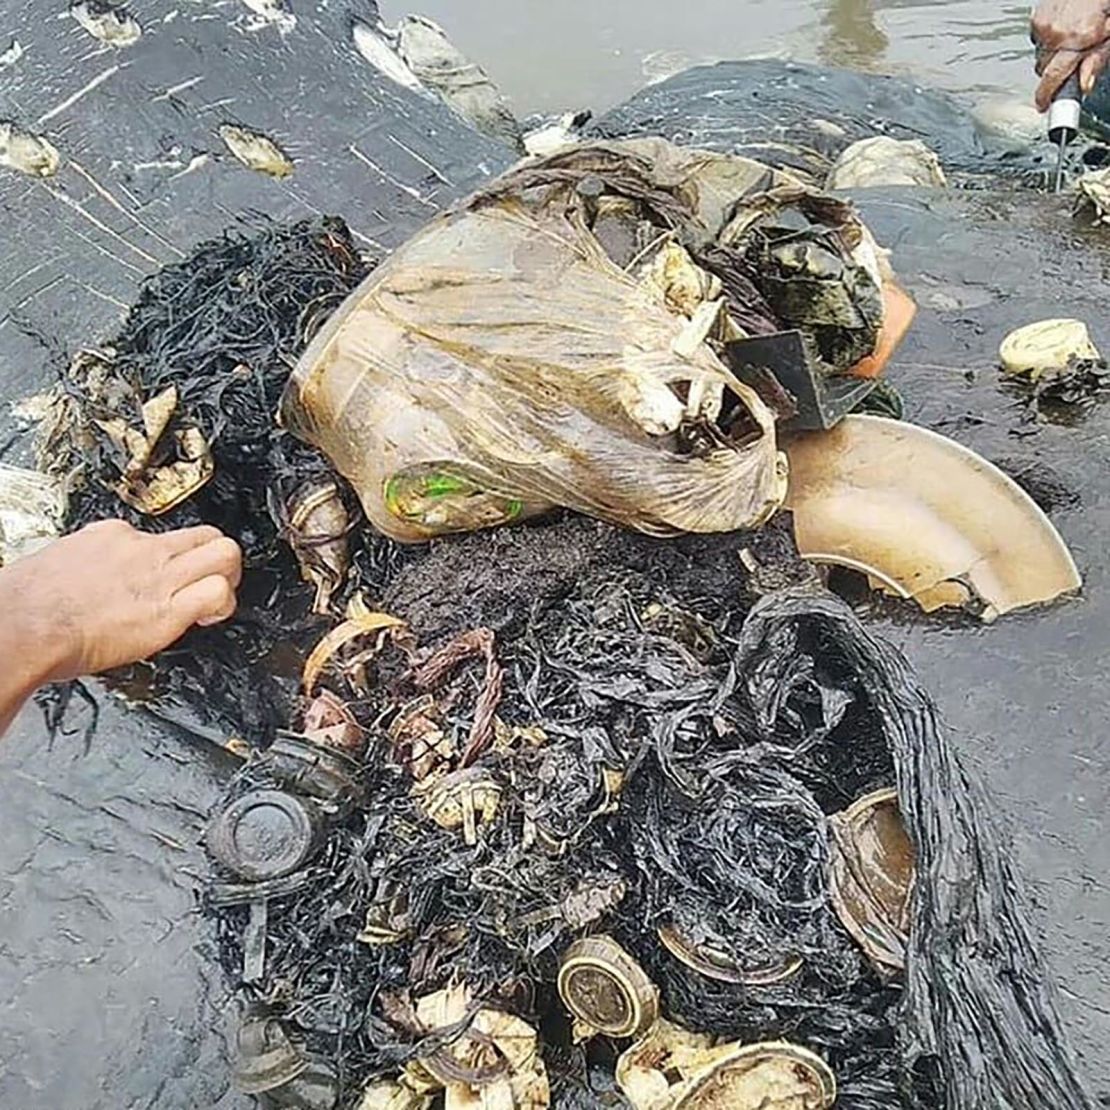 More than 1,000 pieces of plastic were found inside the whale's stomach.